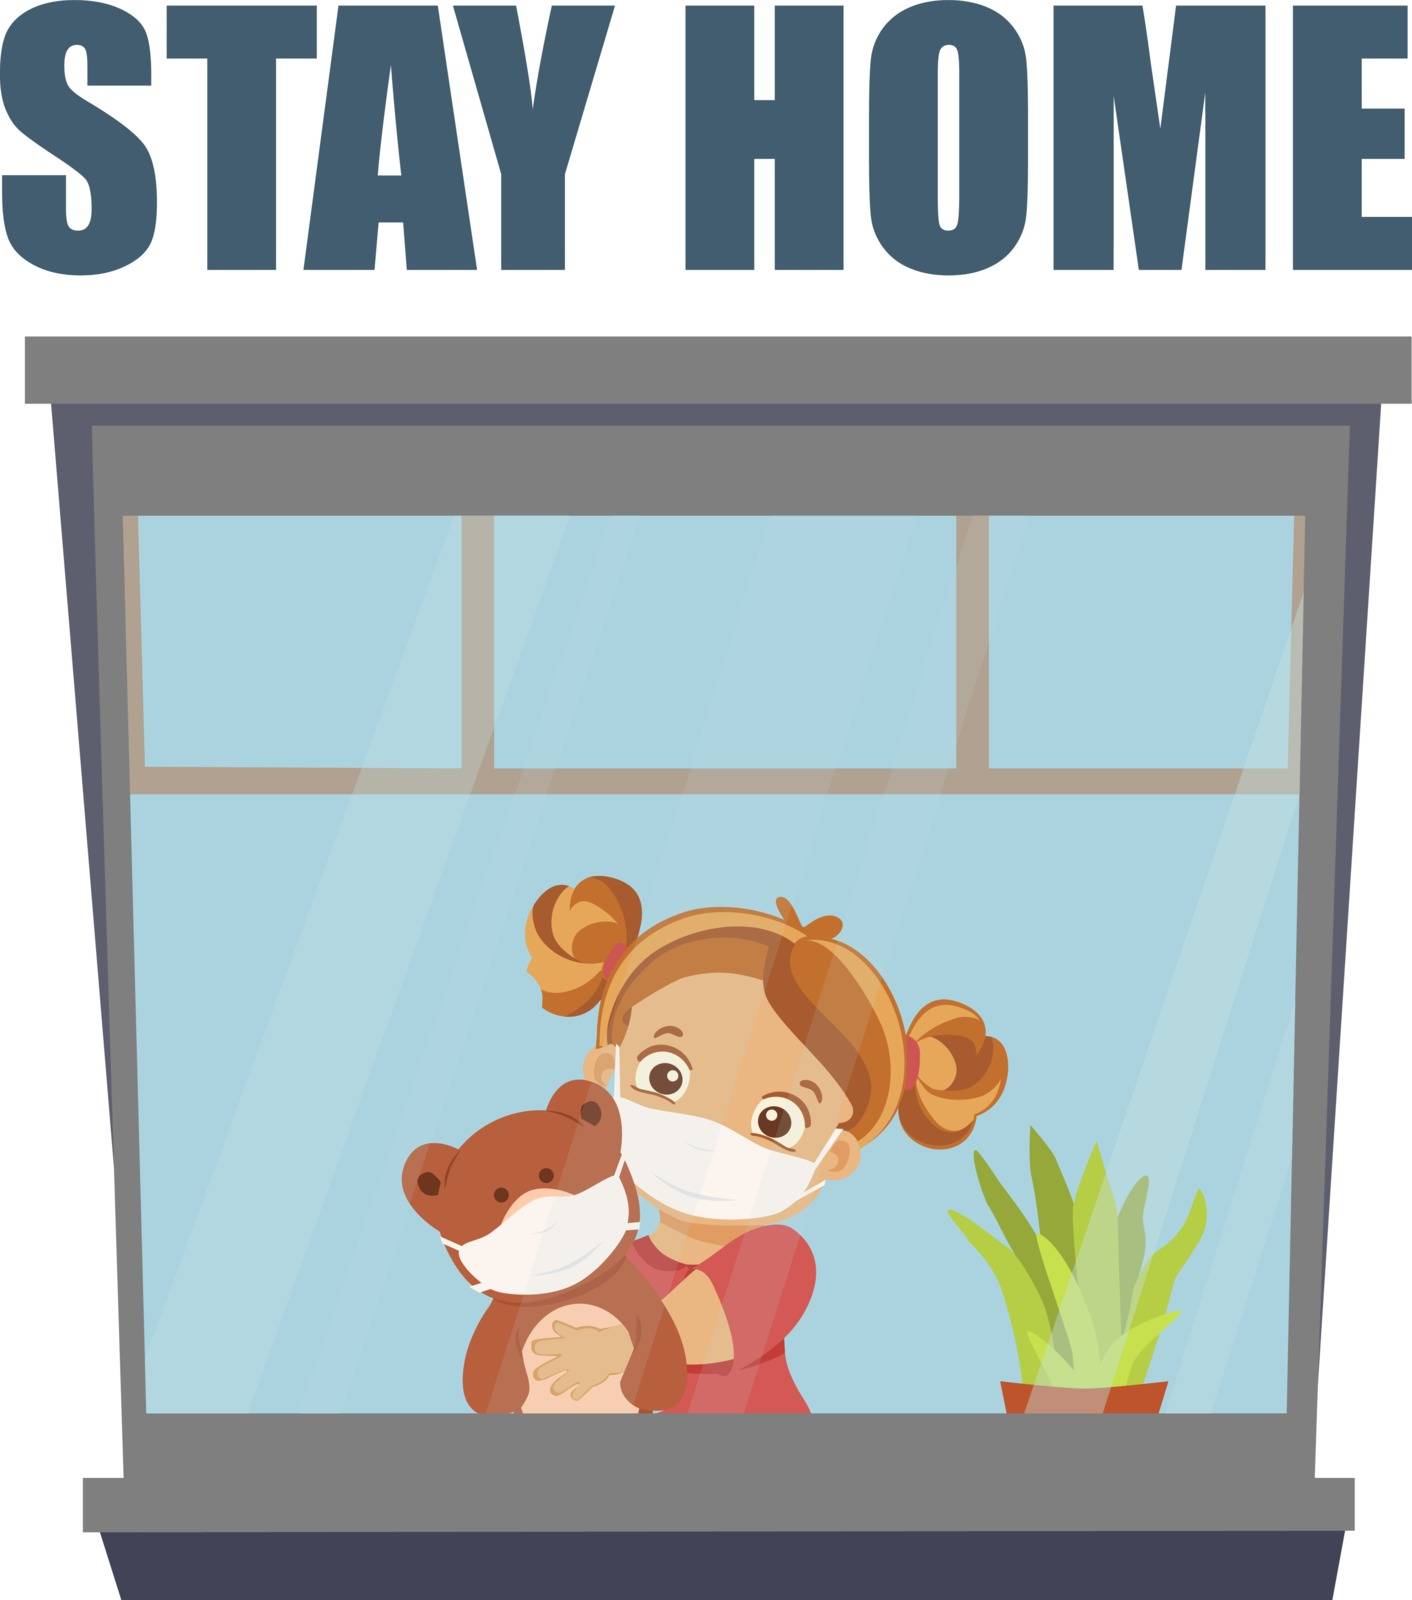 Stay home during the epidemic Vector illustration by Visual-Content